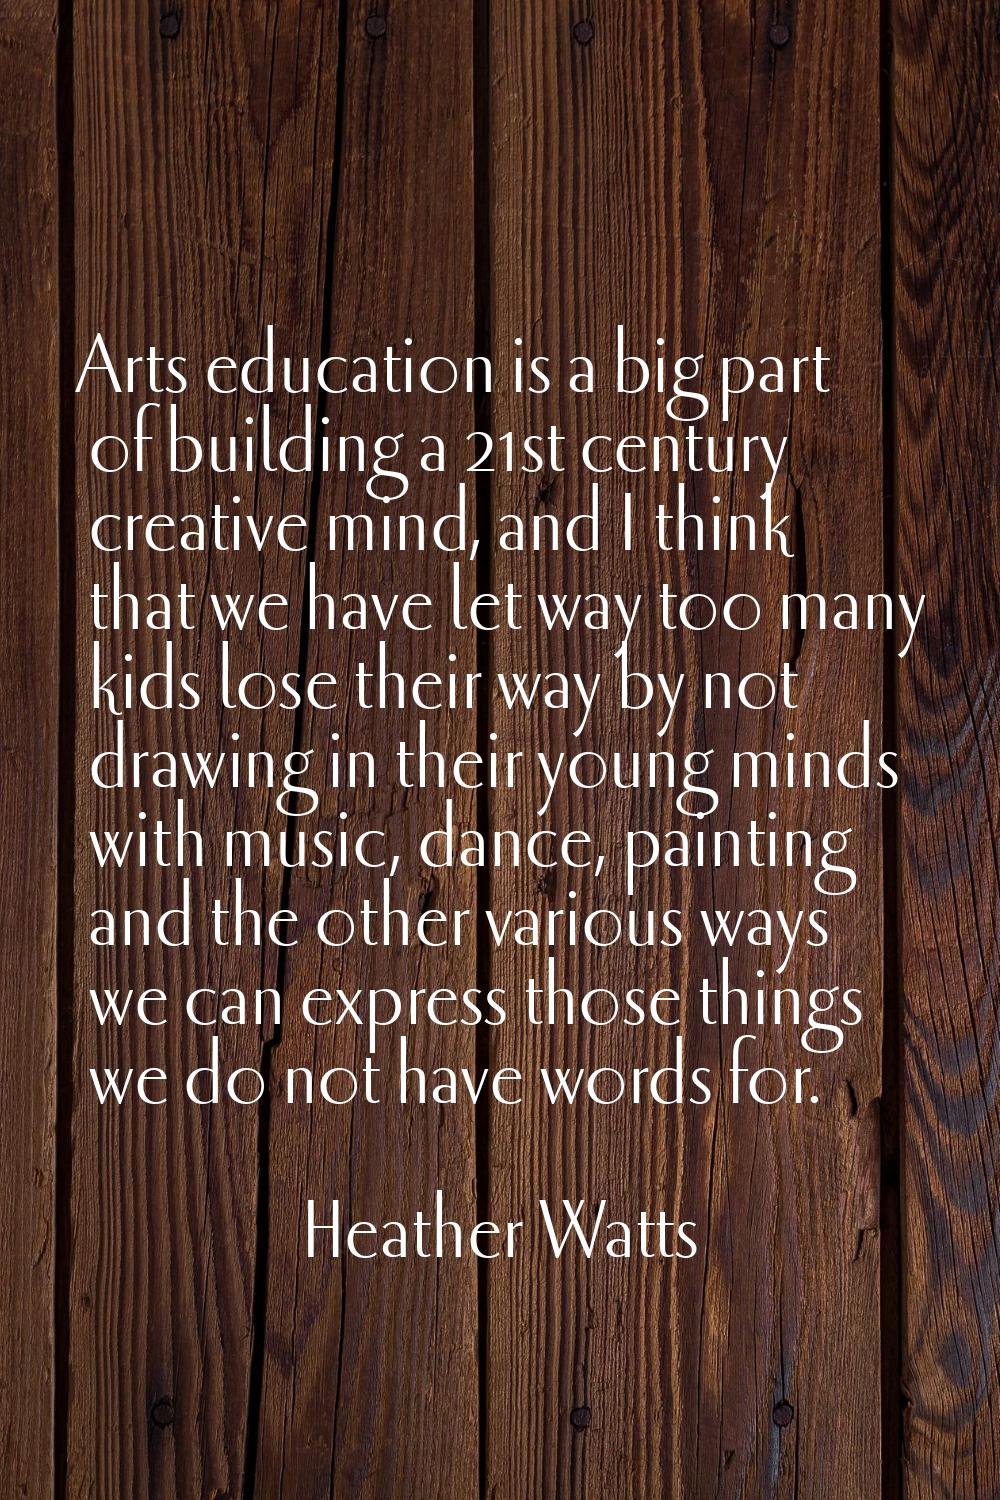 Arts education is a big part of building a 21st century creative mind, and I think that we have let